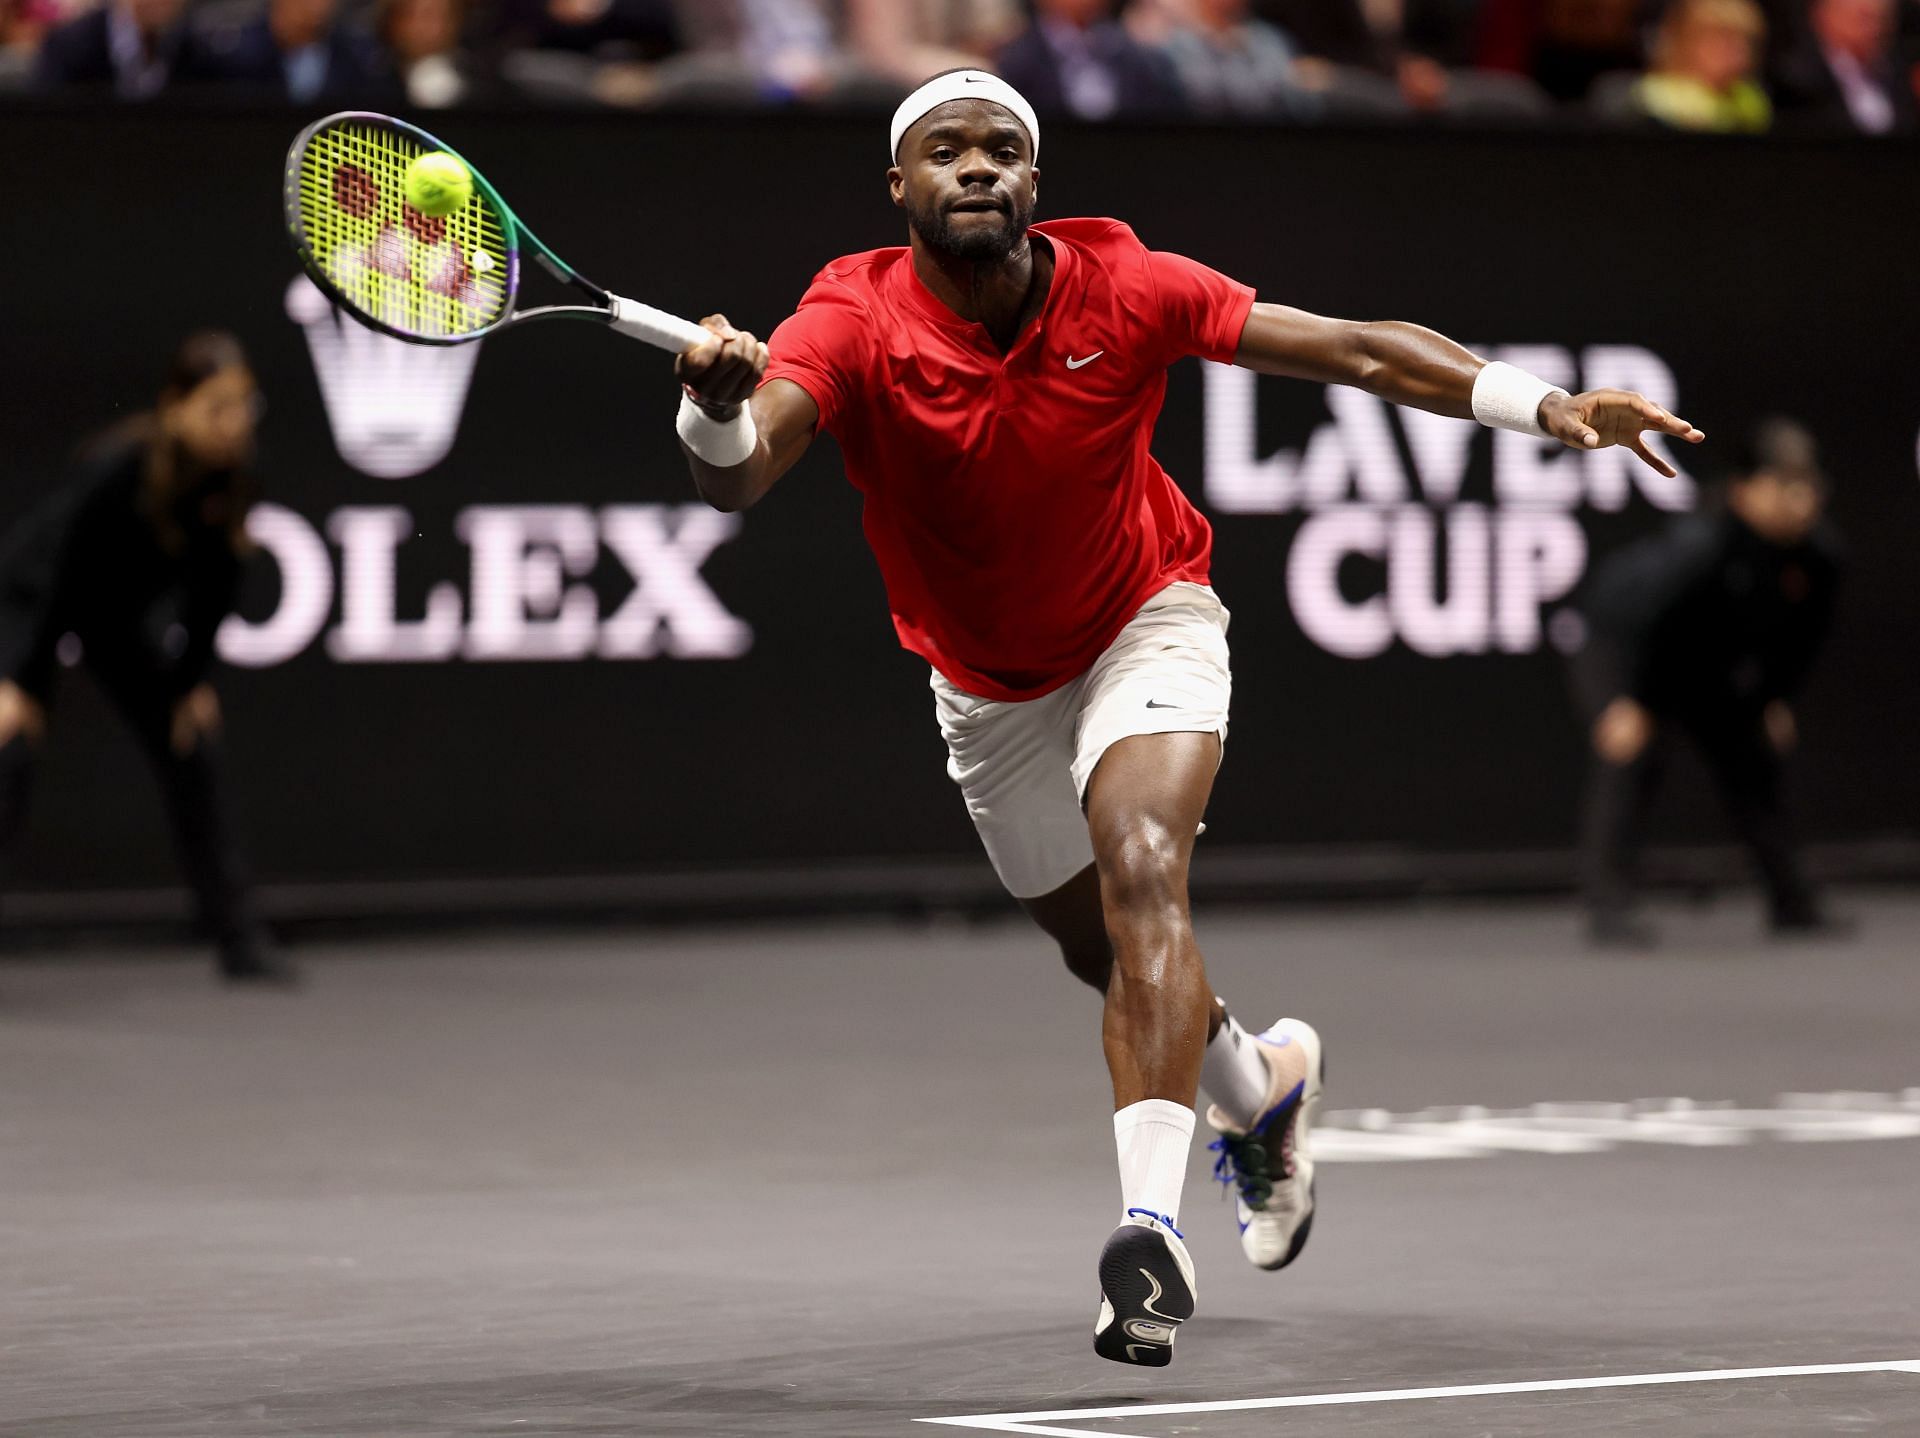 Tiafoe will be the favorite to win the encounter